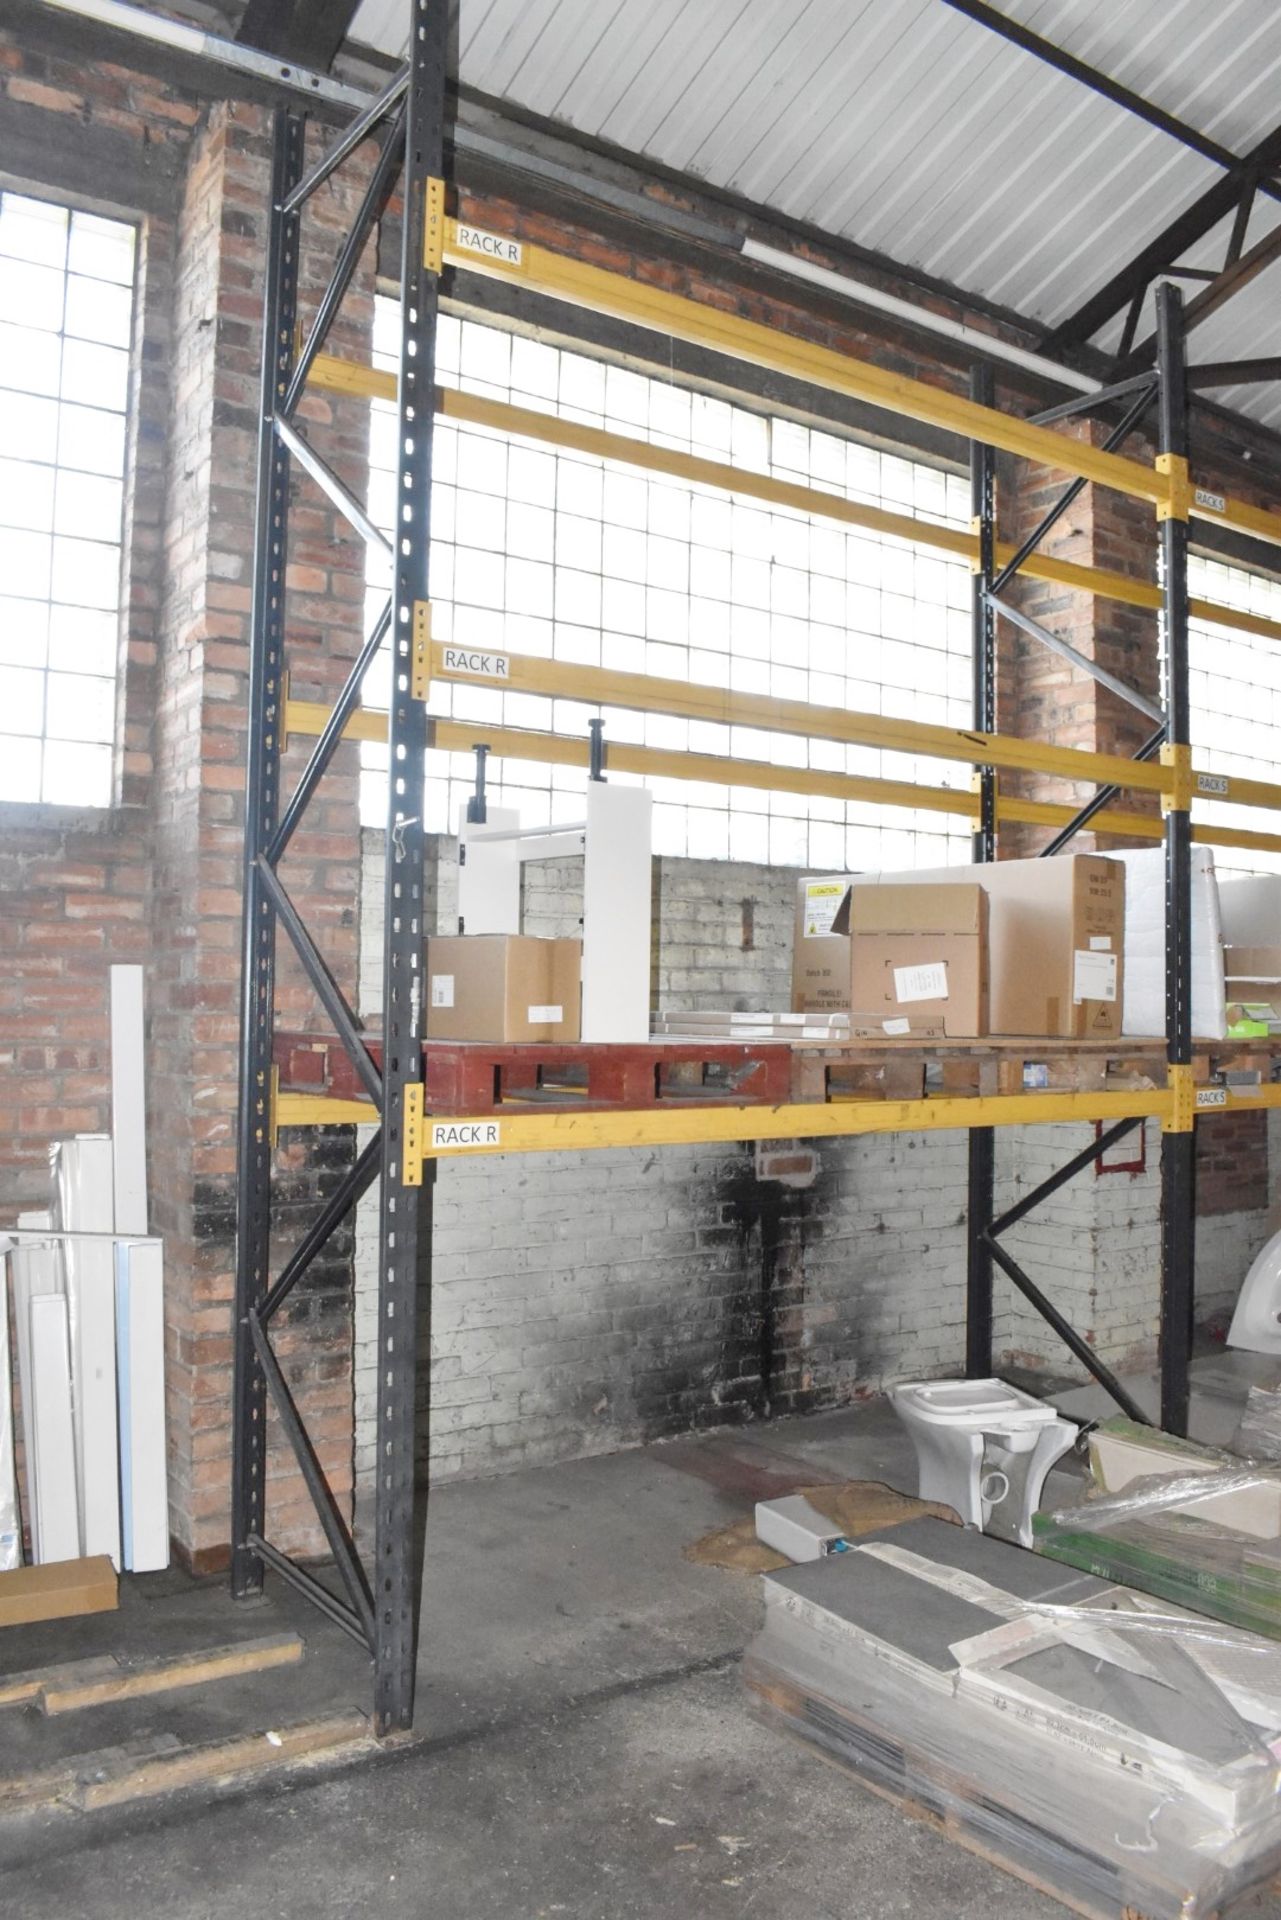 2 x Bays of Pallet Racking - Includes 3 x Uprights and 12 x Crossbeams - Size: H400 x W500 x D90cms - Image 3 of 6